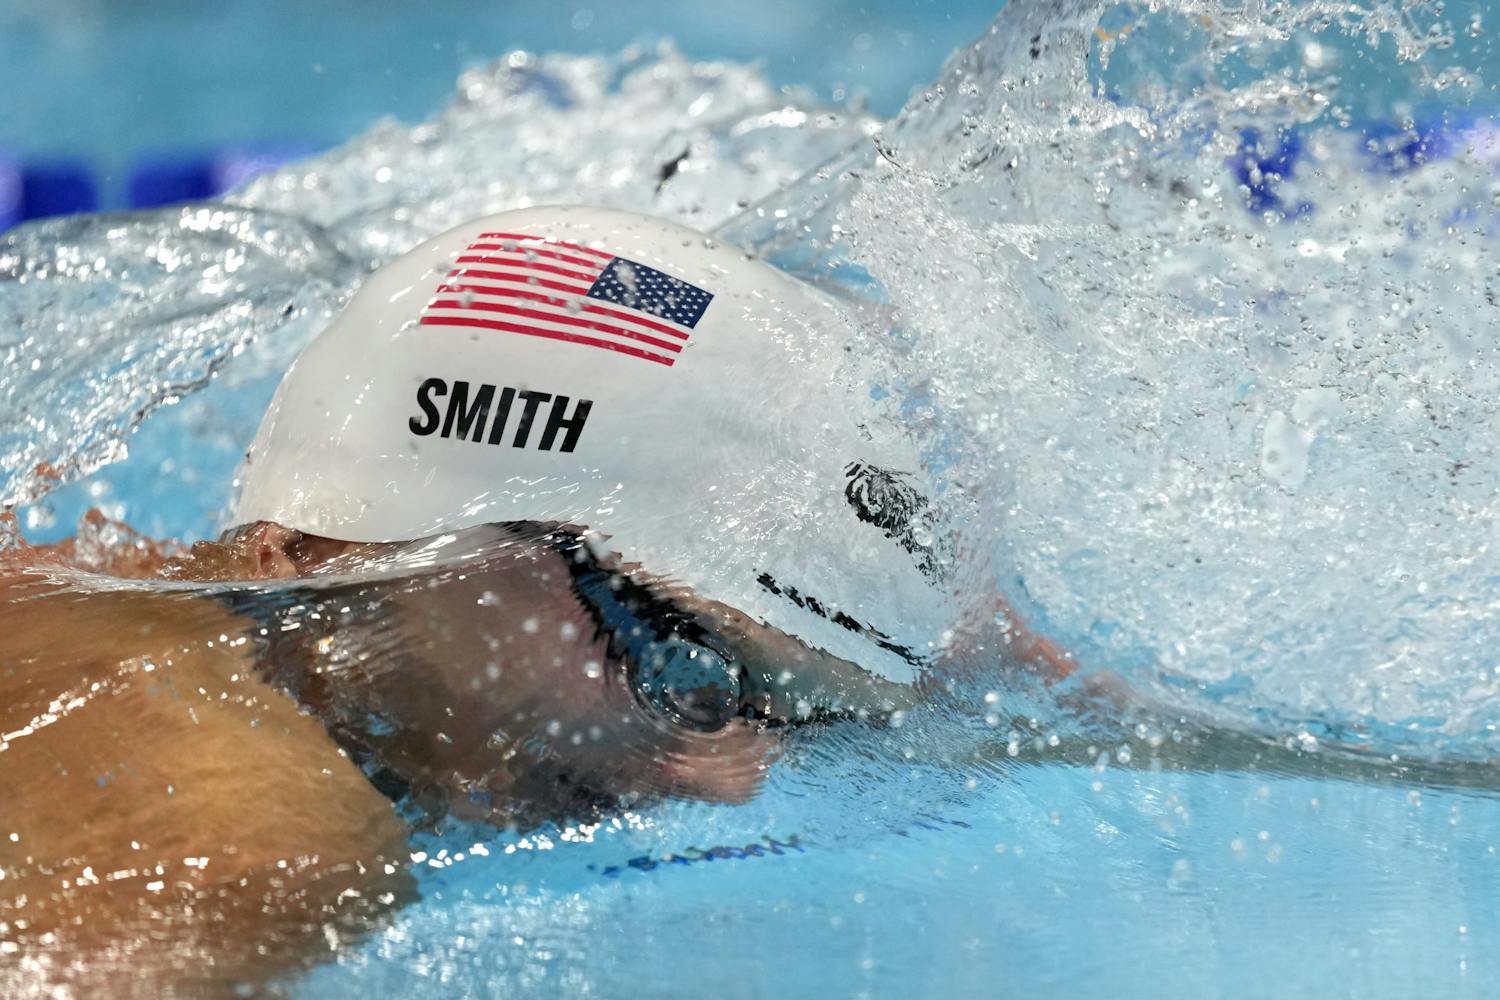 Kieran Smith, a senior who took home a bronze medal in the 400-meter freestyle at the 2020 Tokyo Olympics, finished first in the 200-meter freestyle (AP Photo/Martin Meissner)